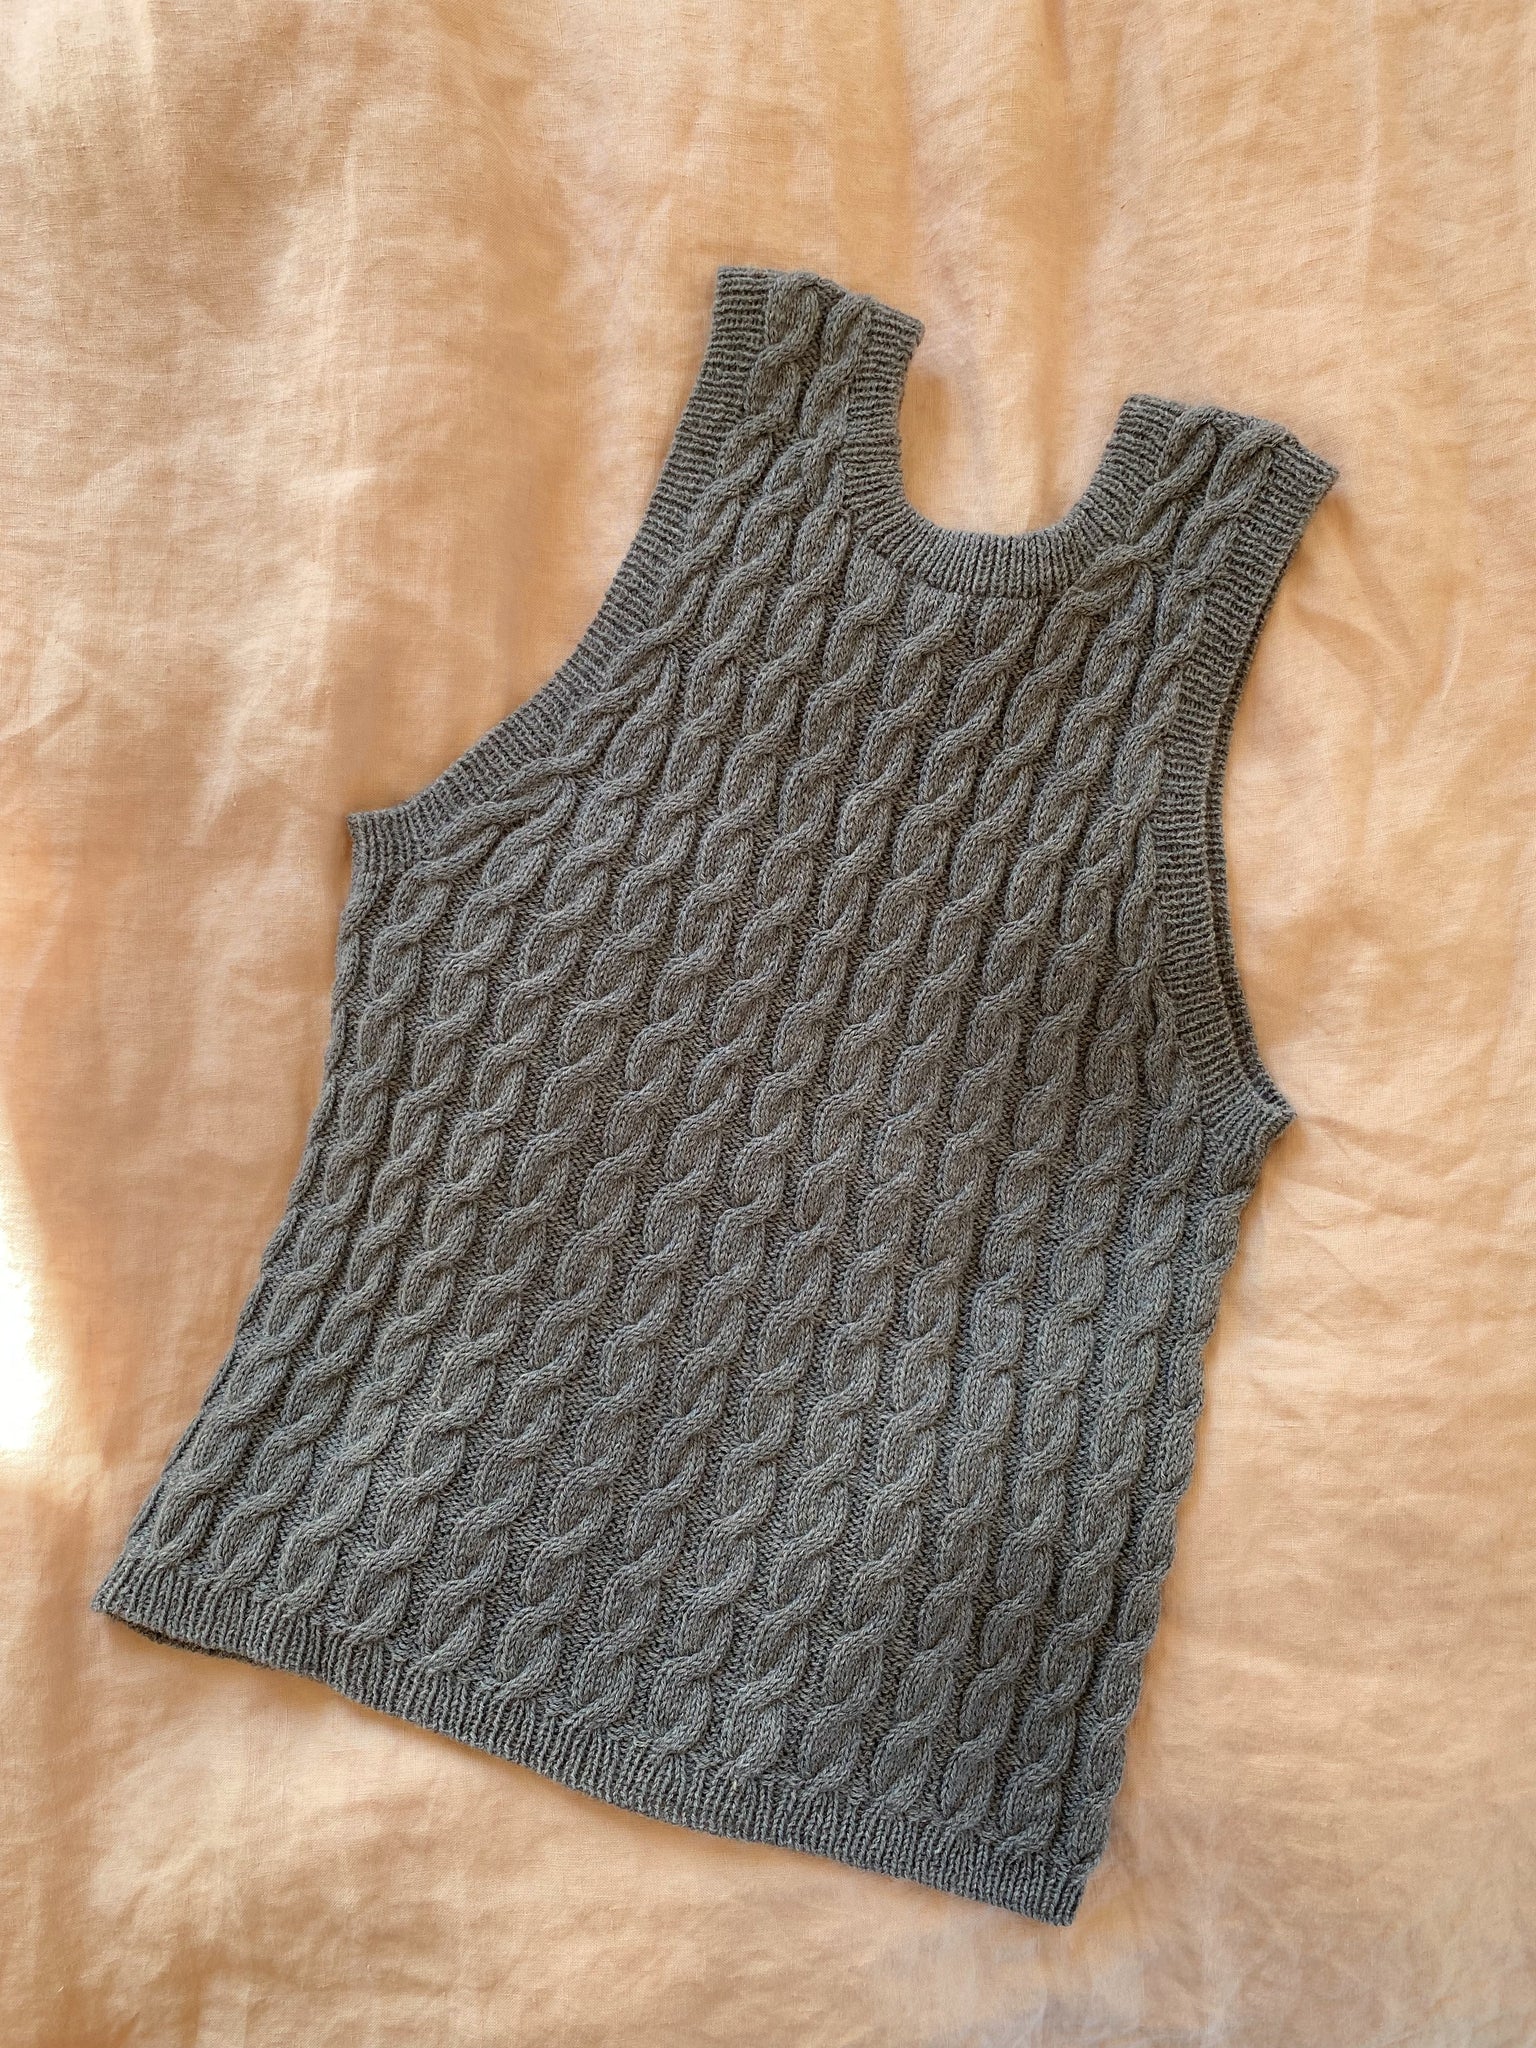 Camisole No. 5 - Knitting Pattern in English – • MY FAVOURITE THINGS •  KNITWEAR